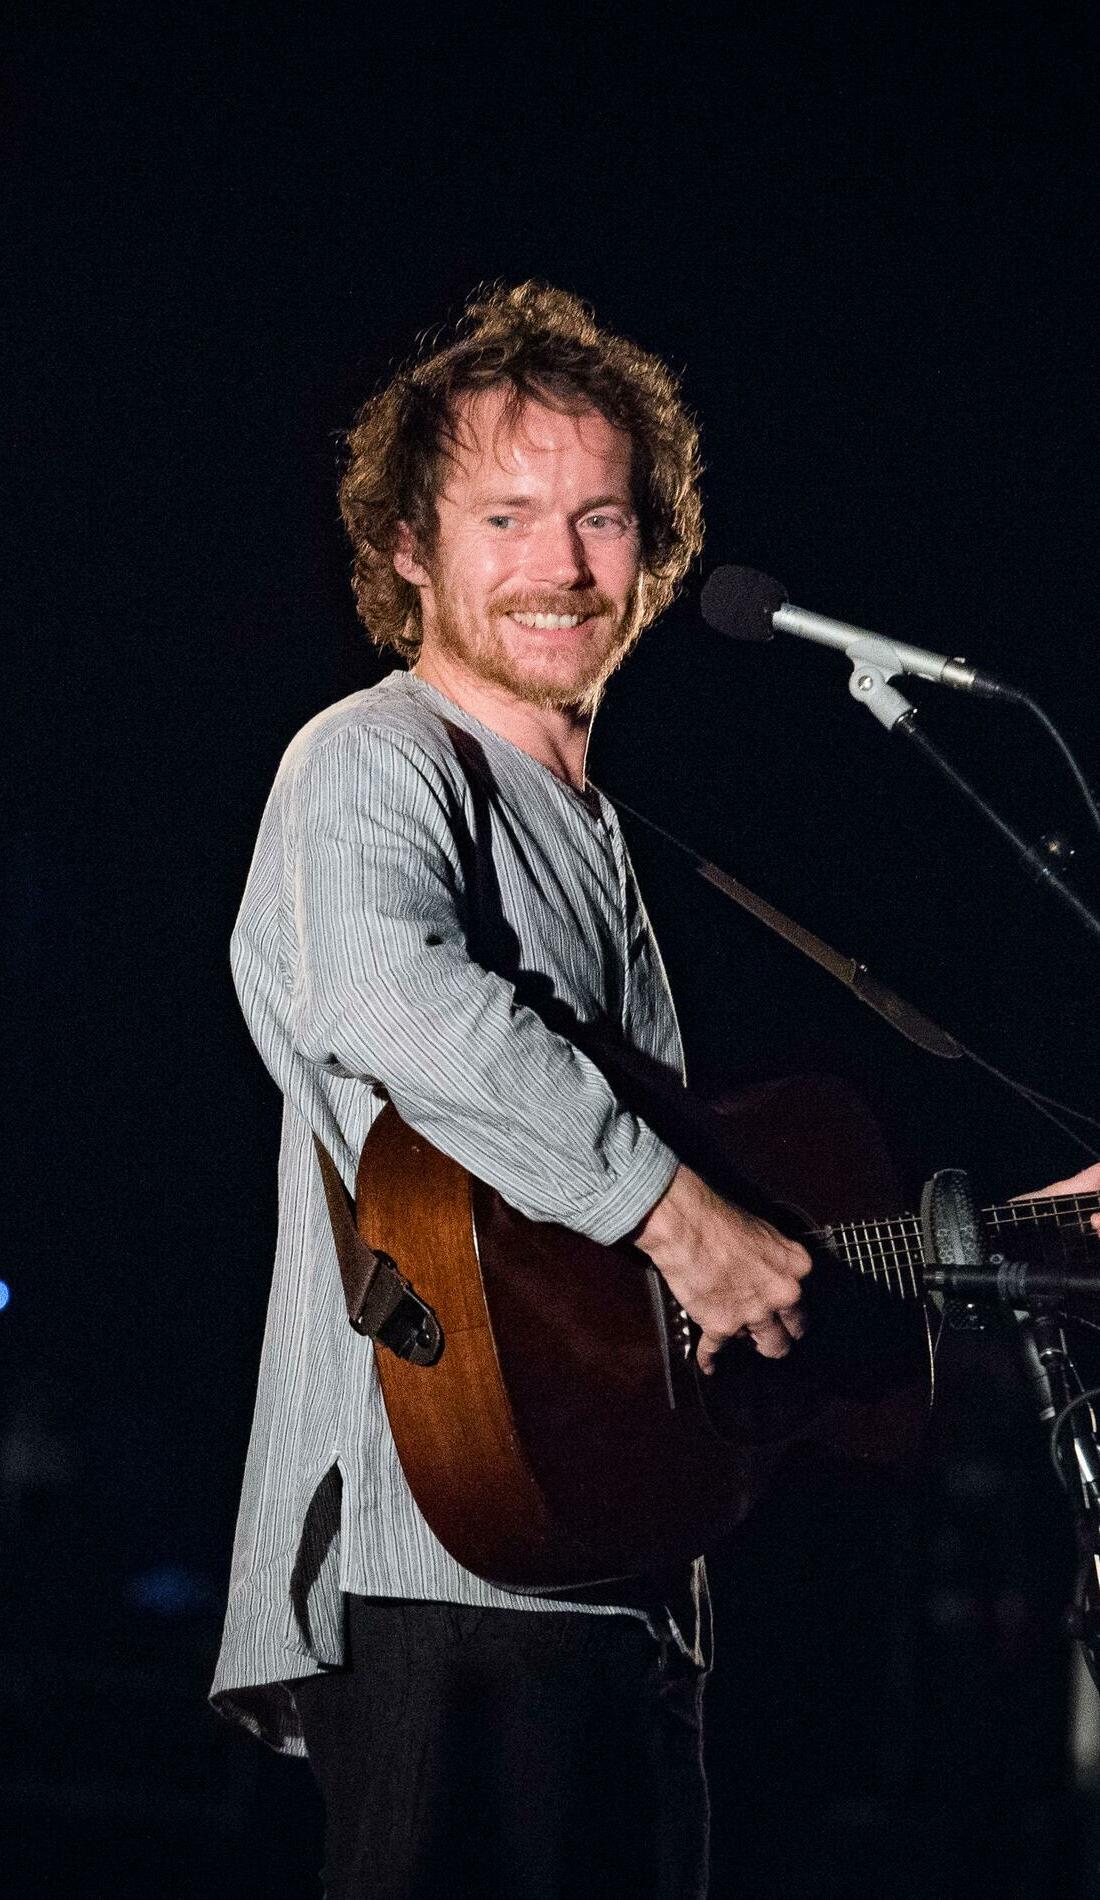 A Damien Rice live event